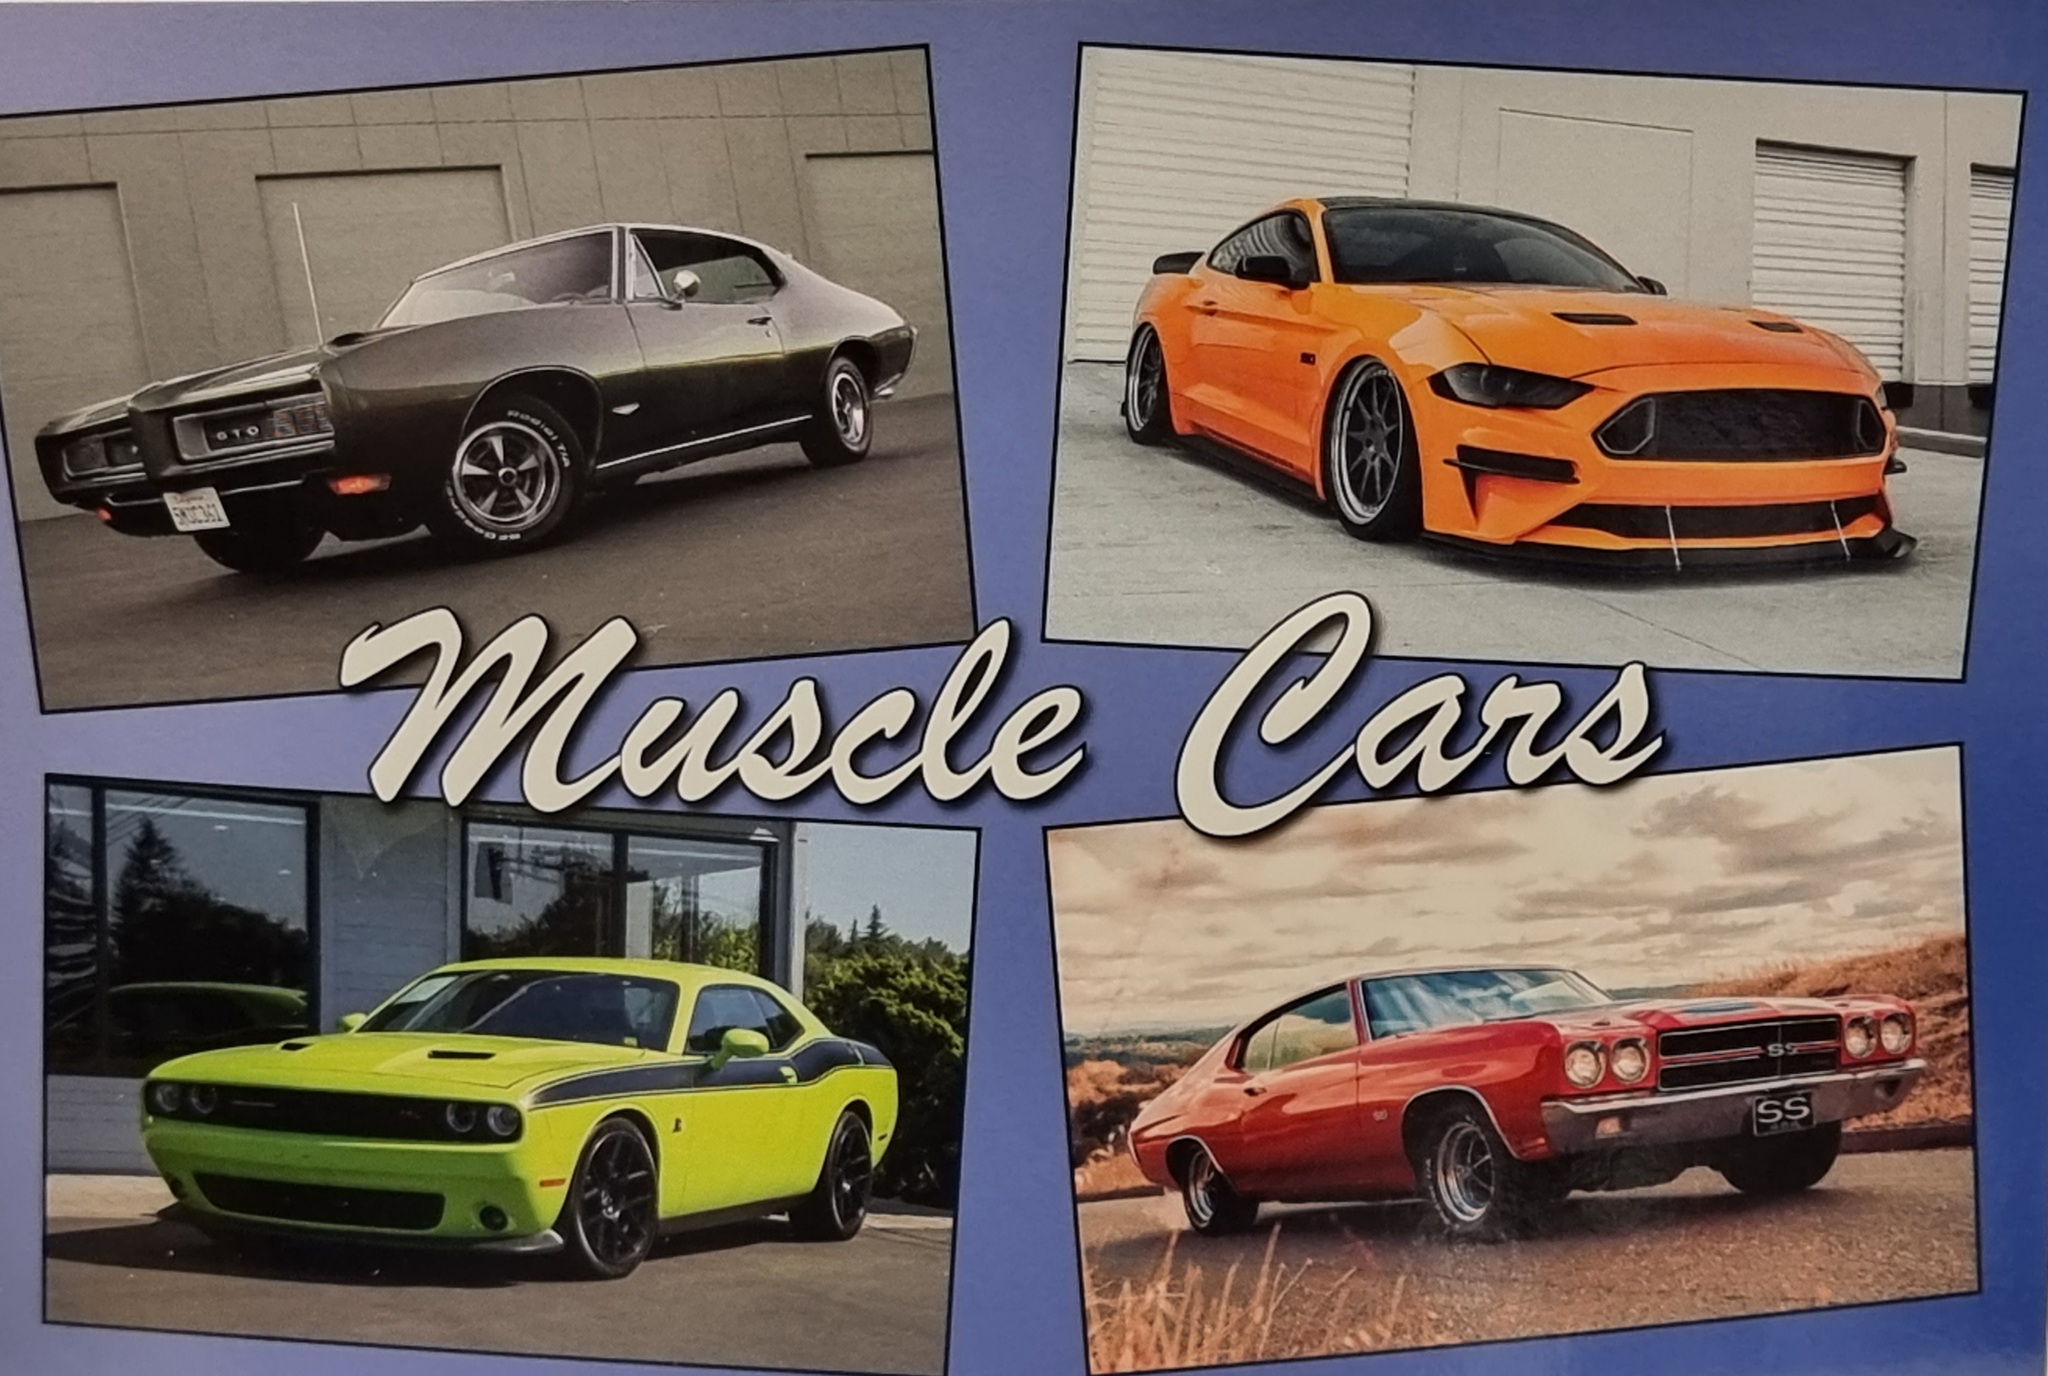 Vykort: Muscle Cars, 170 x 115 mm